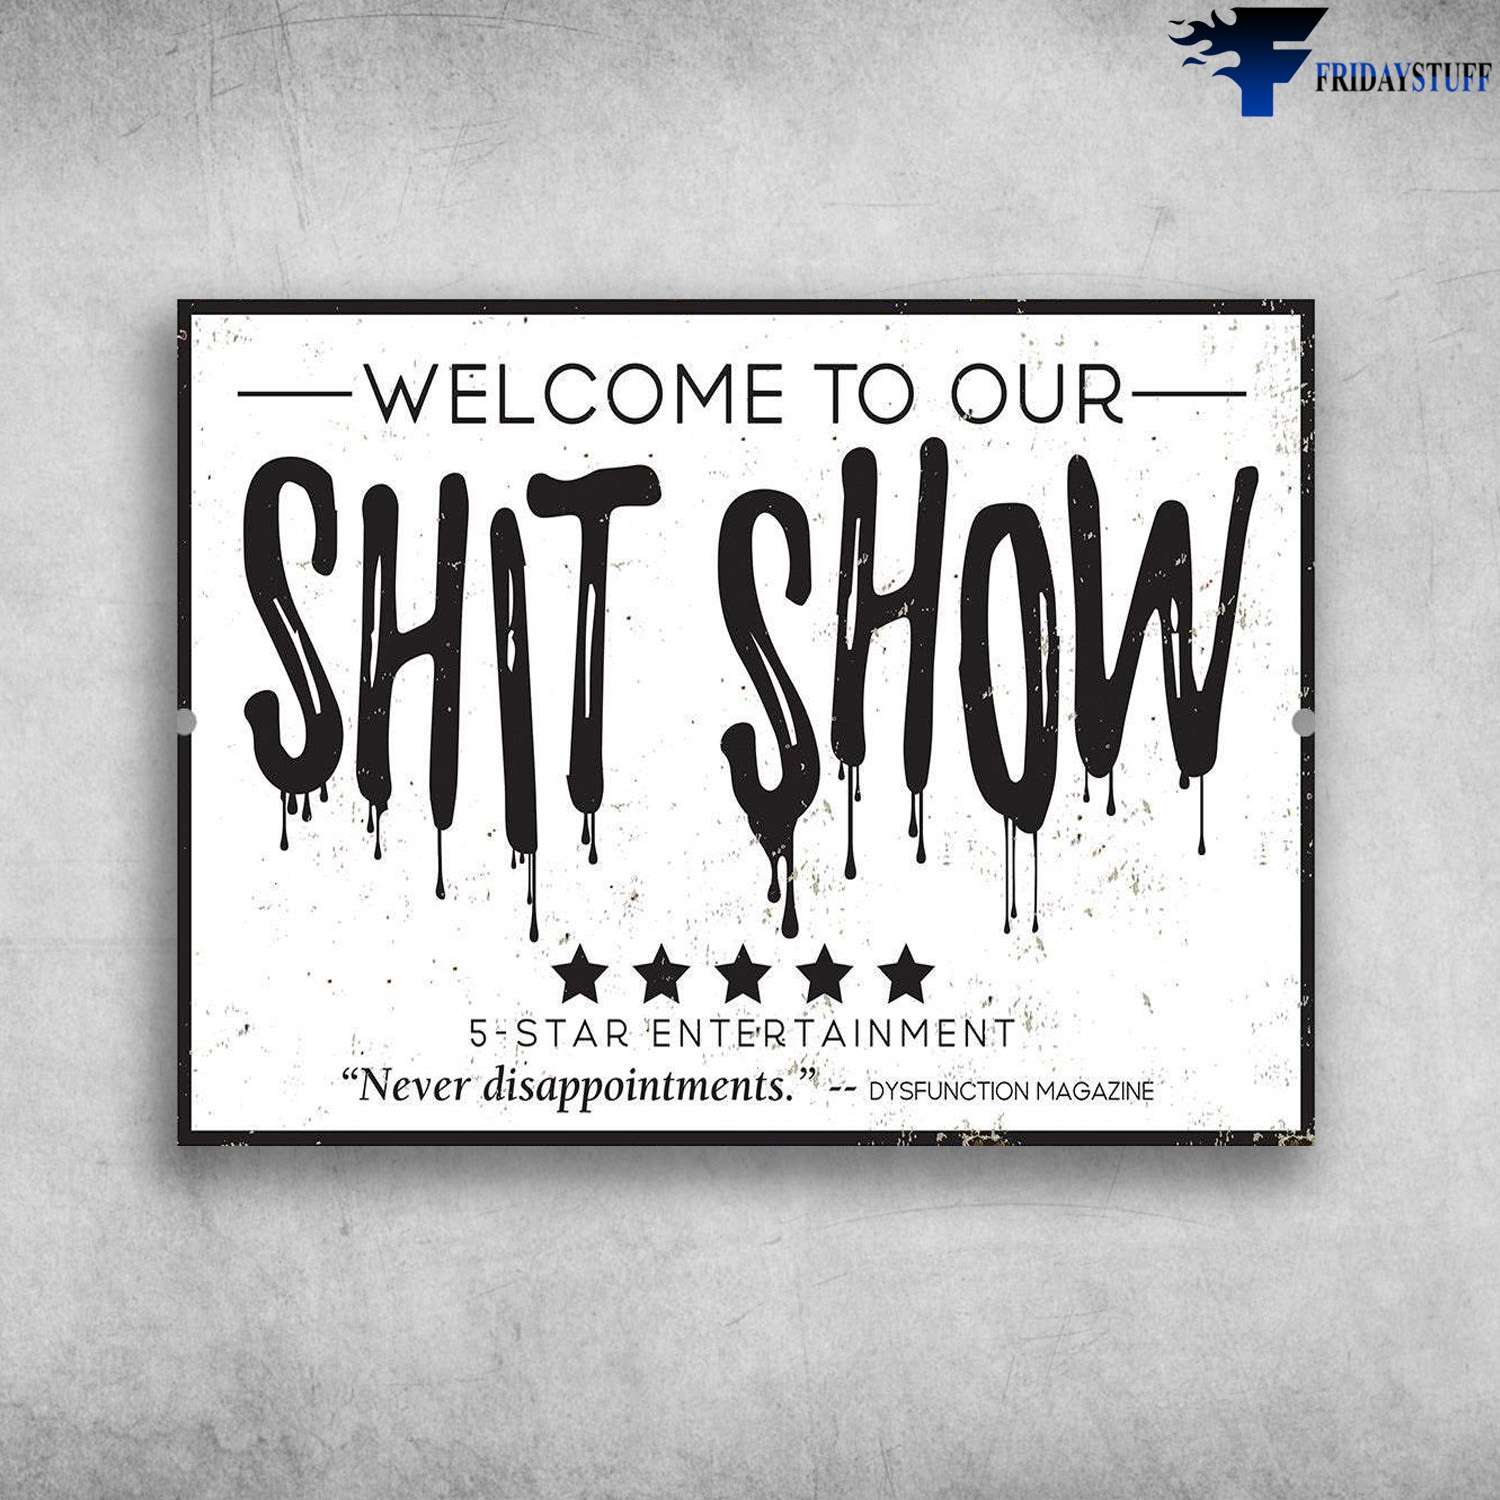 Welcome To Our Shit Show, 5-Star Entertainment, Never Disappointment, Dysfunction Magazine